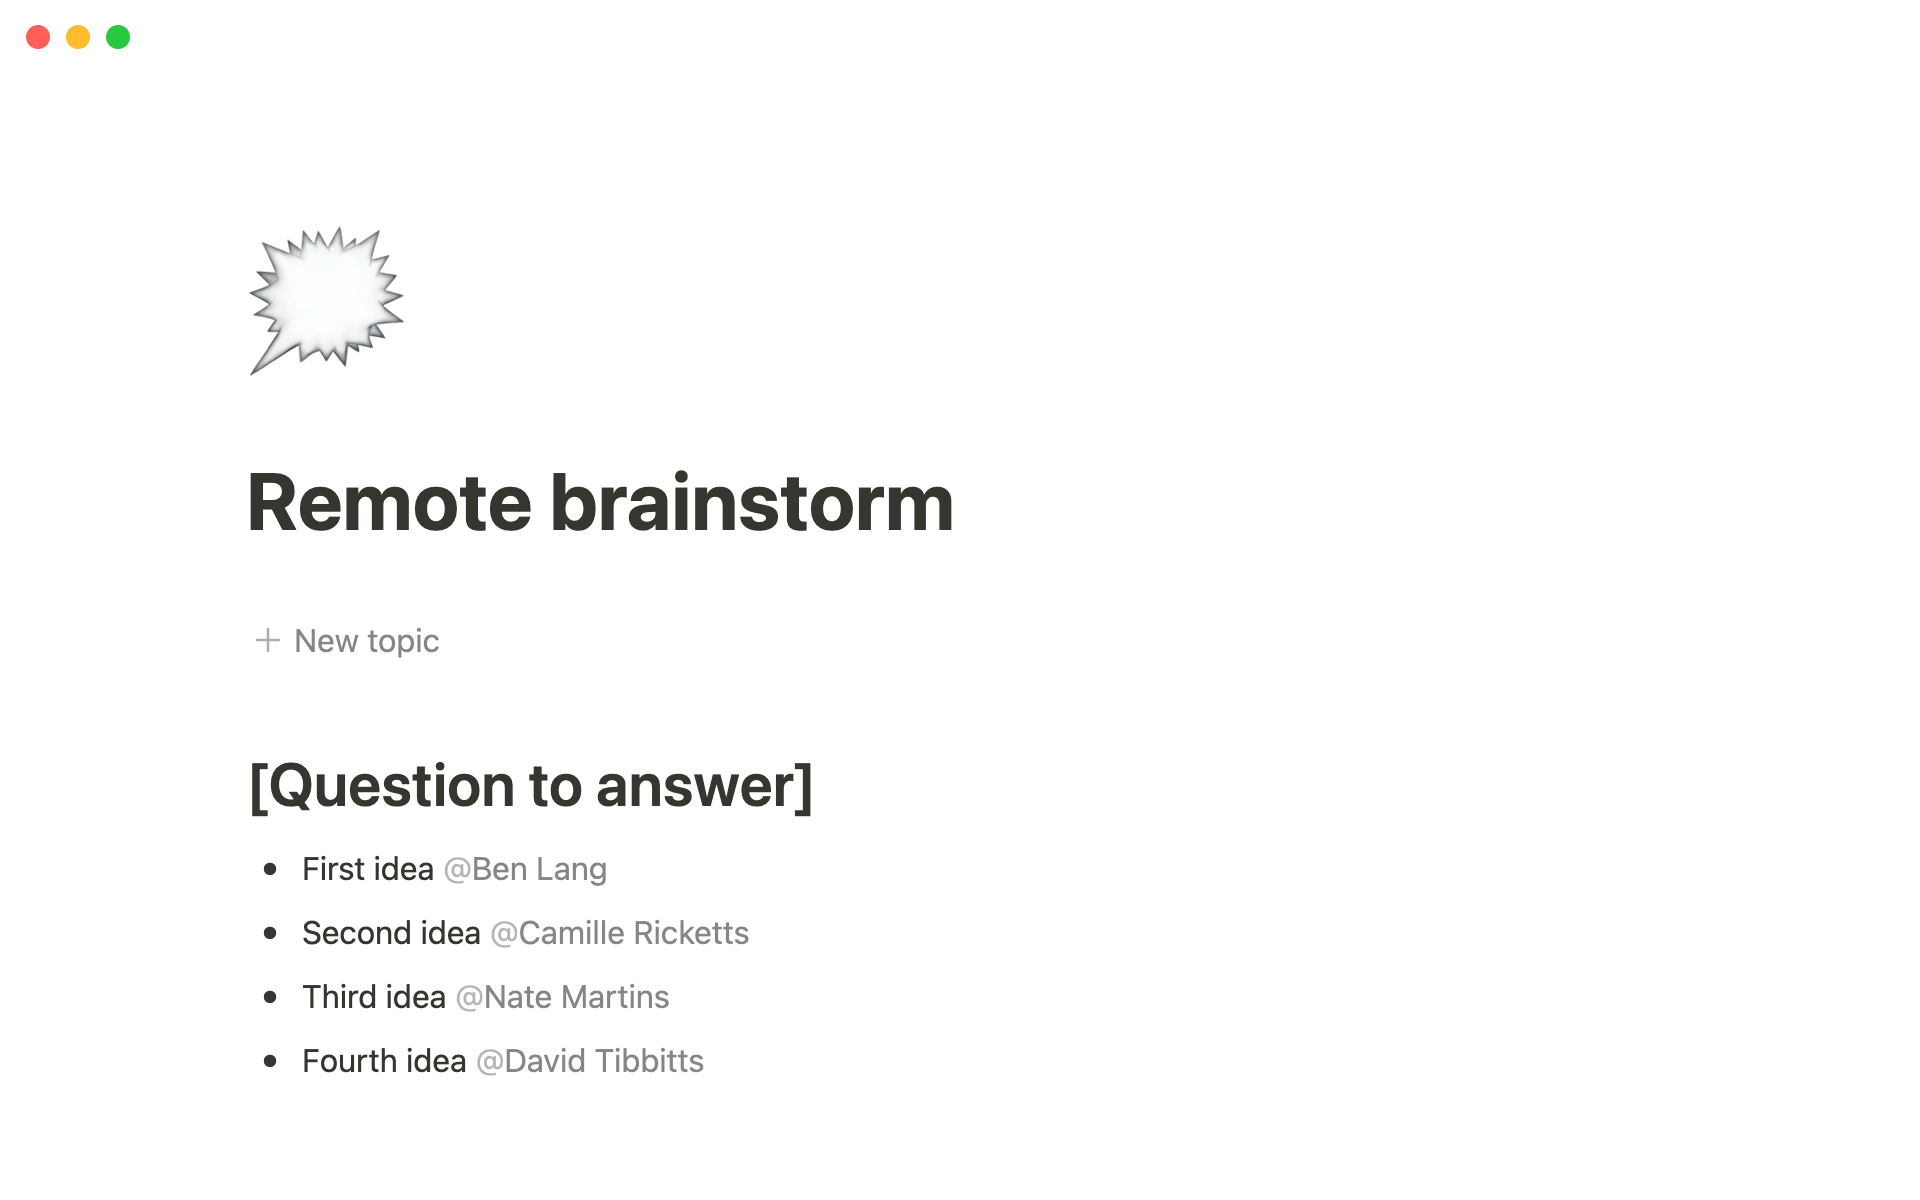 The desktop image for the Remote brainstorm template